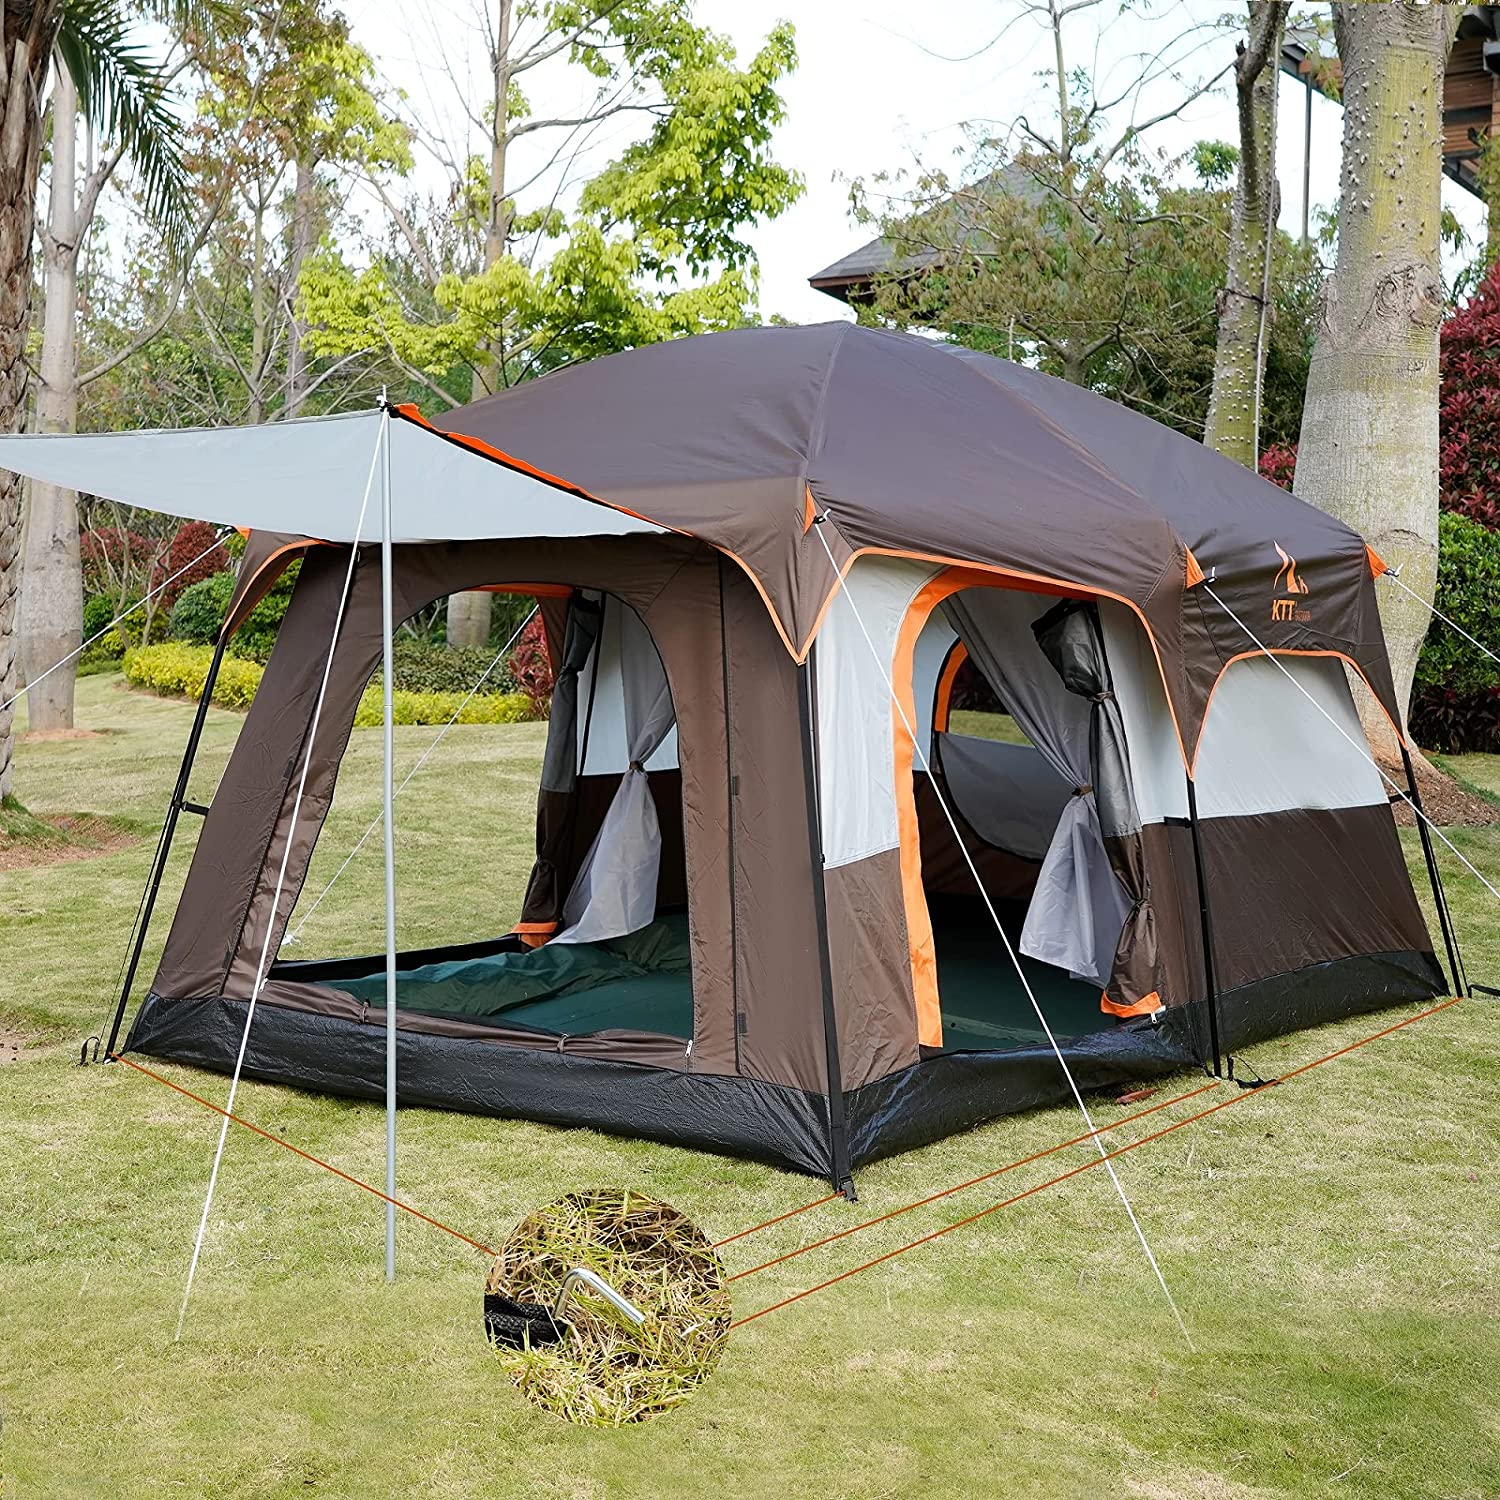 Ktt Family Cabin Tent 4 6 Person Waterproof Camping